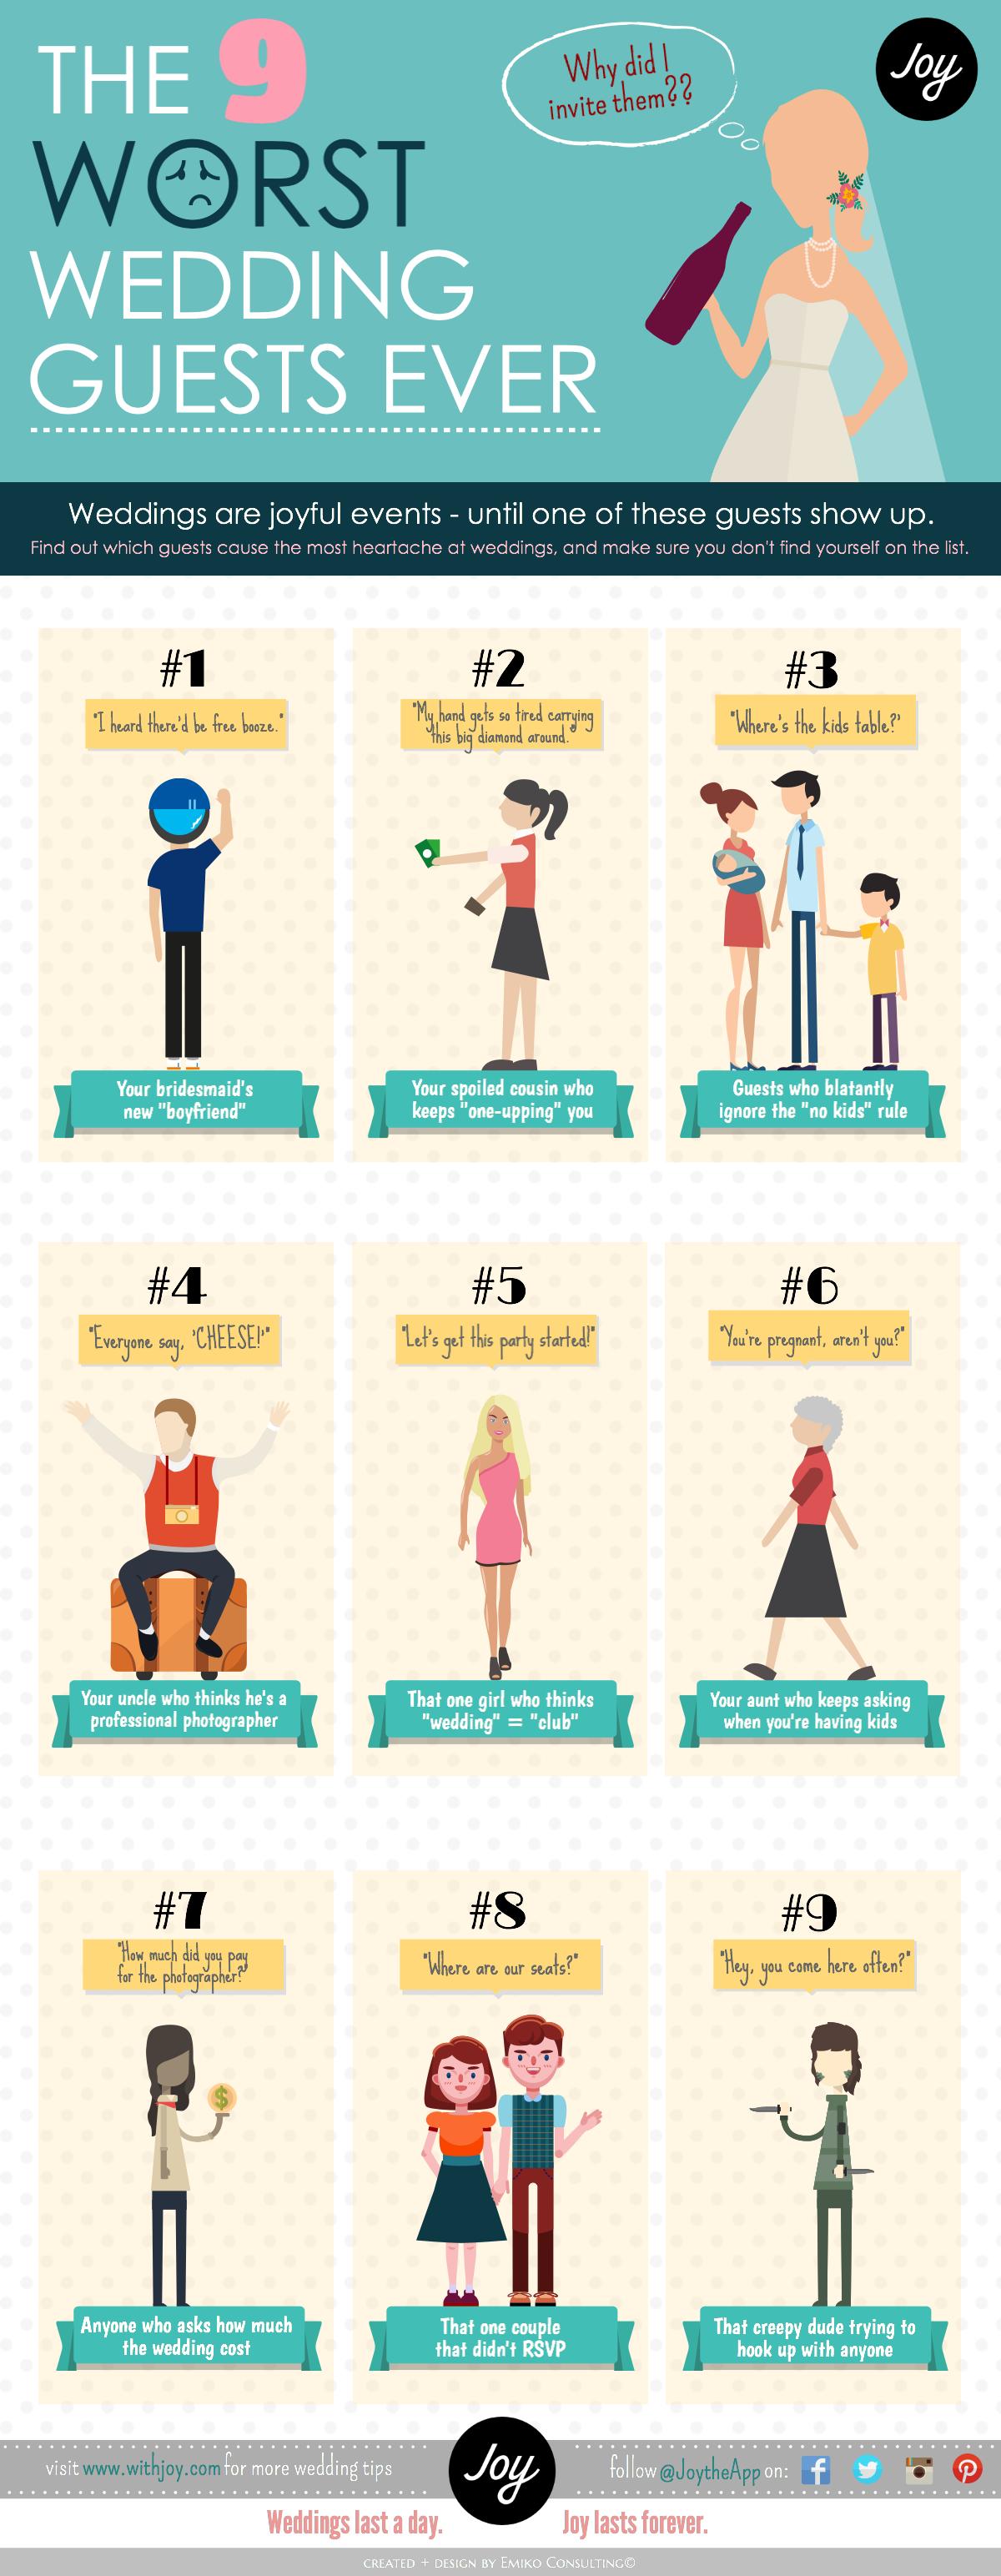 The 9 Worst Wedding Guests Ever [Infographic]